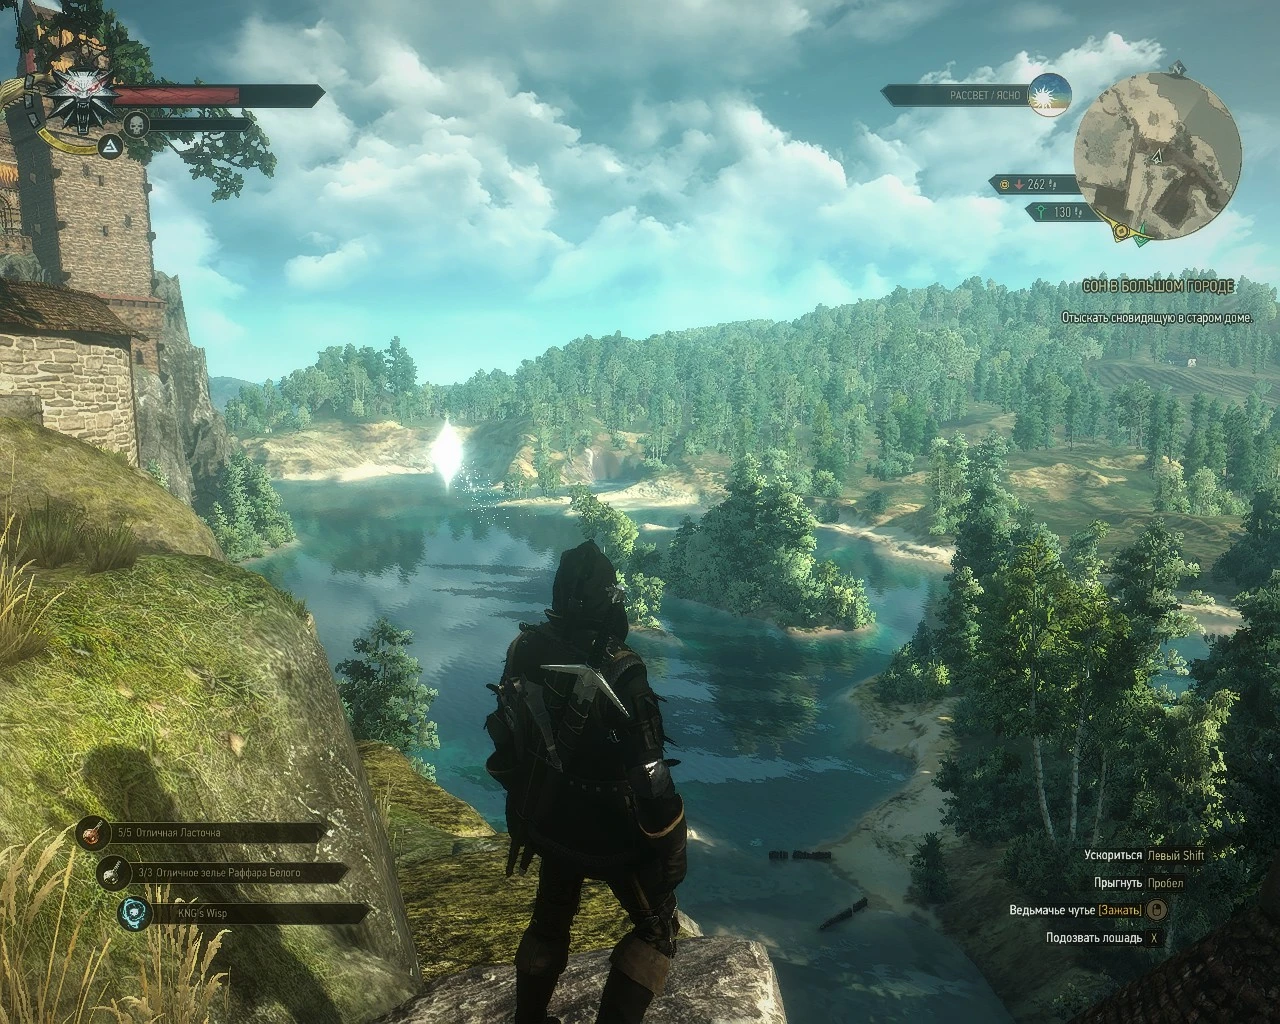 The witcher 3 console nexus фото 45